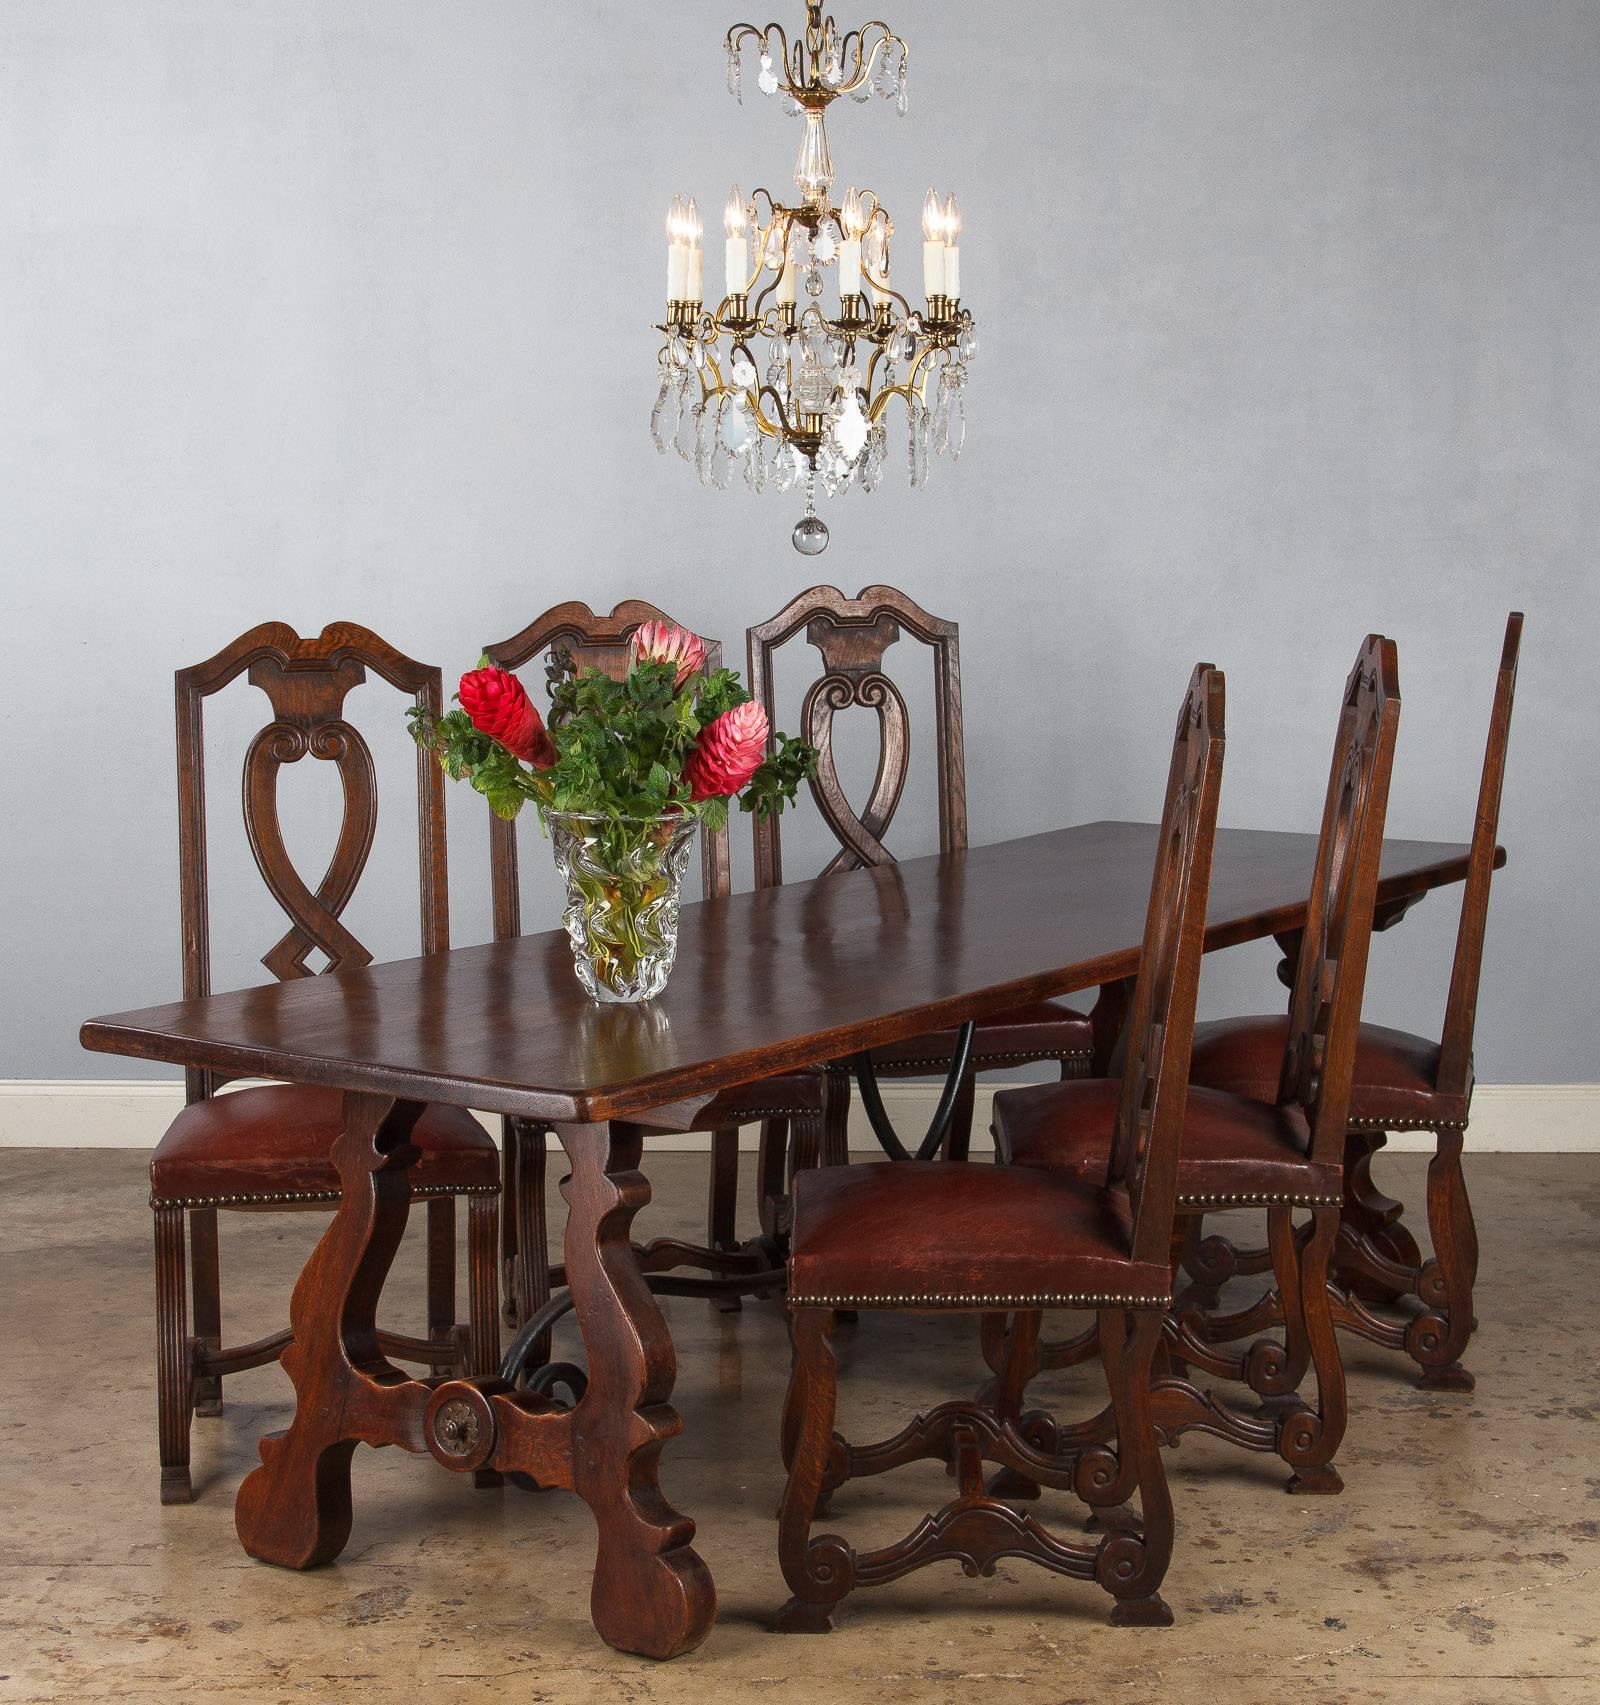 A beautiful trestle table from Spain made of oak with a scrolled iron stretcher. A fine dining table that can accommodate 10 guests. Floor to Apron: 27.75